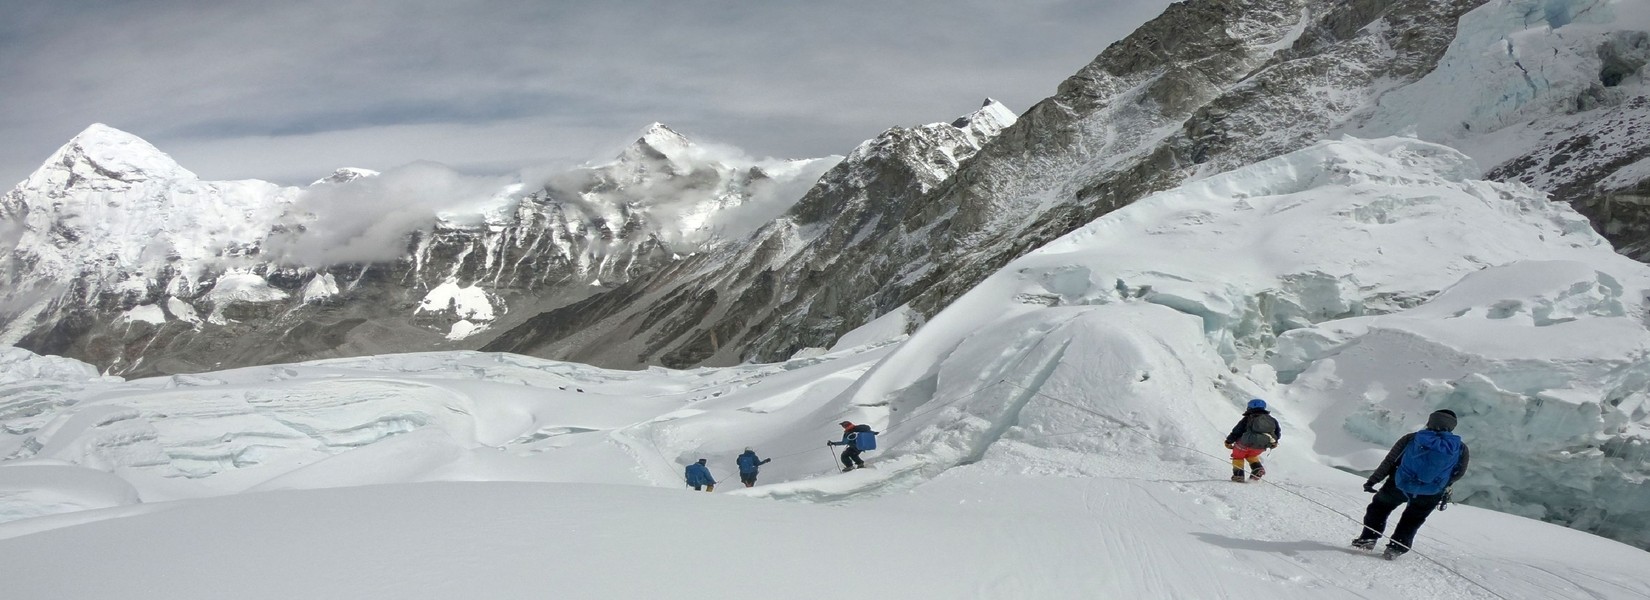 Ascend Mount Everest with Magic Expedition and Tours